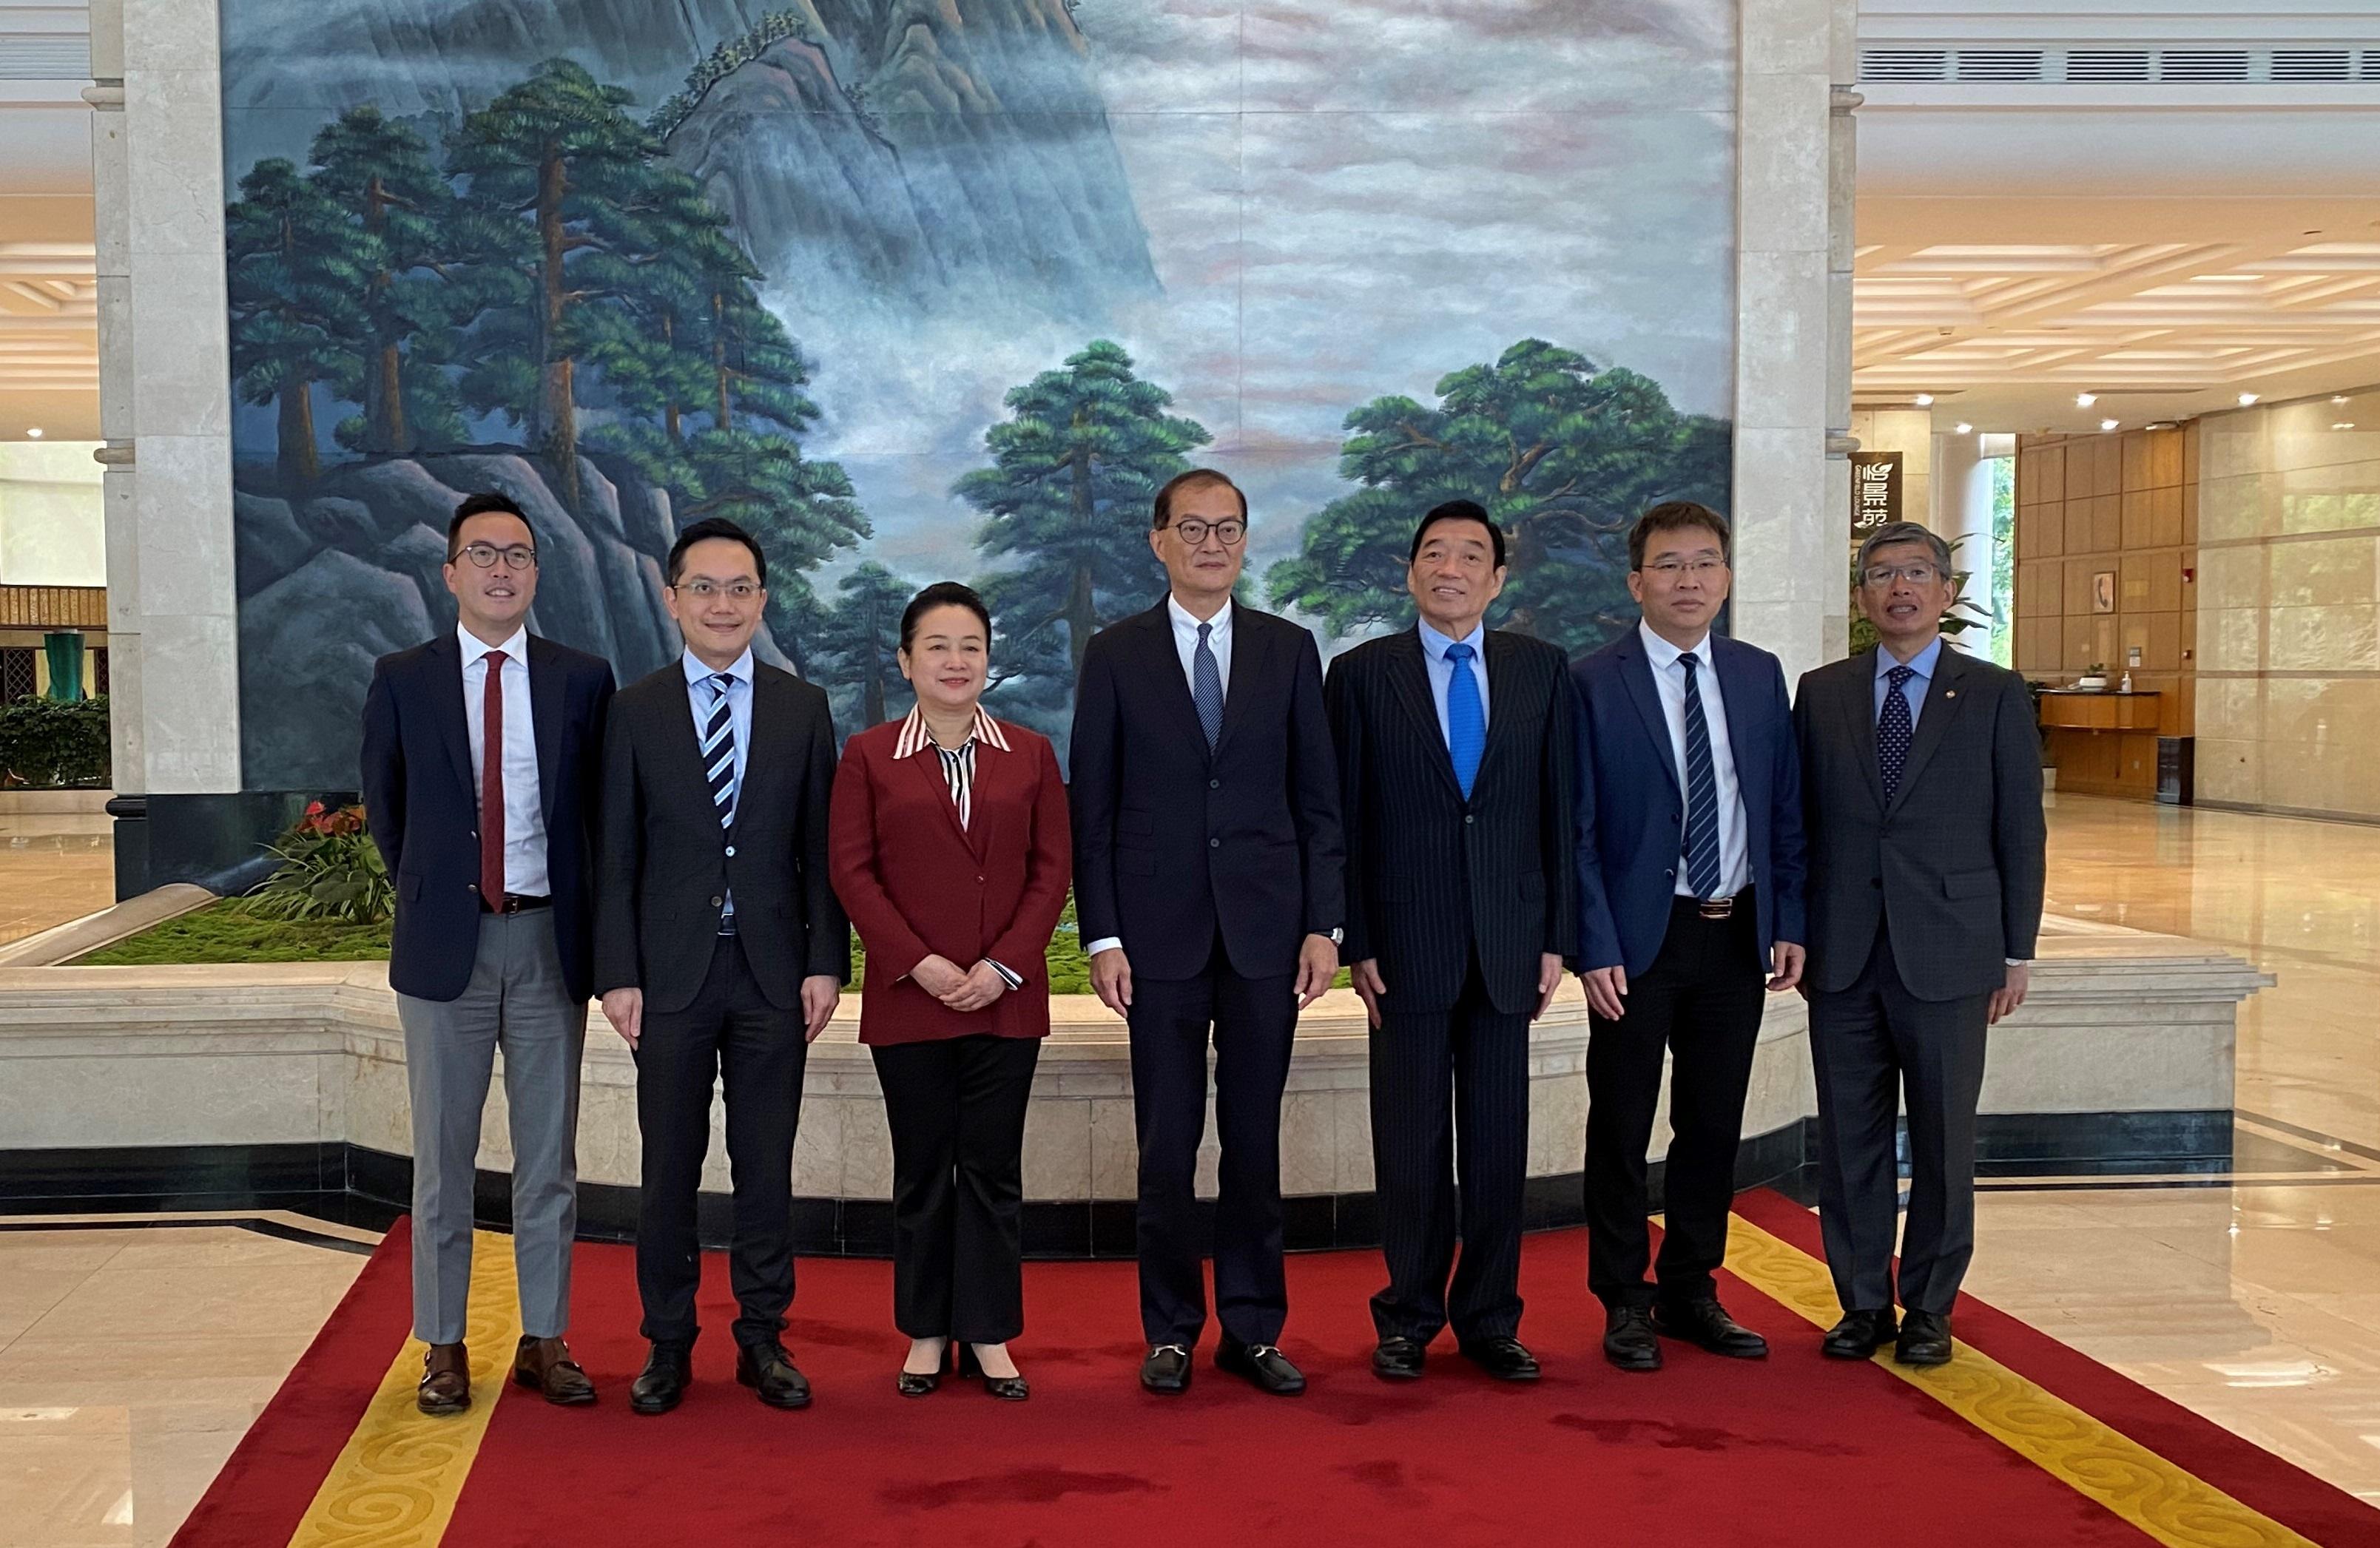 The Secretary for Health, Professor Lo Chung-mau, led his delegation to visit the Shenzhen Municipal Health Commission today (March 30). Photo shows Professor Lo (centre); the Director General of the Shenzhen Municipal Health Commission, Ms Wu Hongyan (third left); the Director of Health, Dr Ronald Lam (second left); the Chairman of the Hospital Authority, Mr Henry Fan (third right), and other attendees of the meeting.